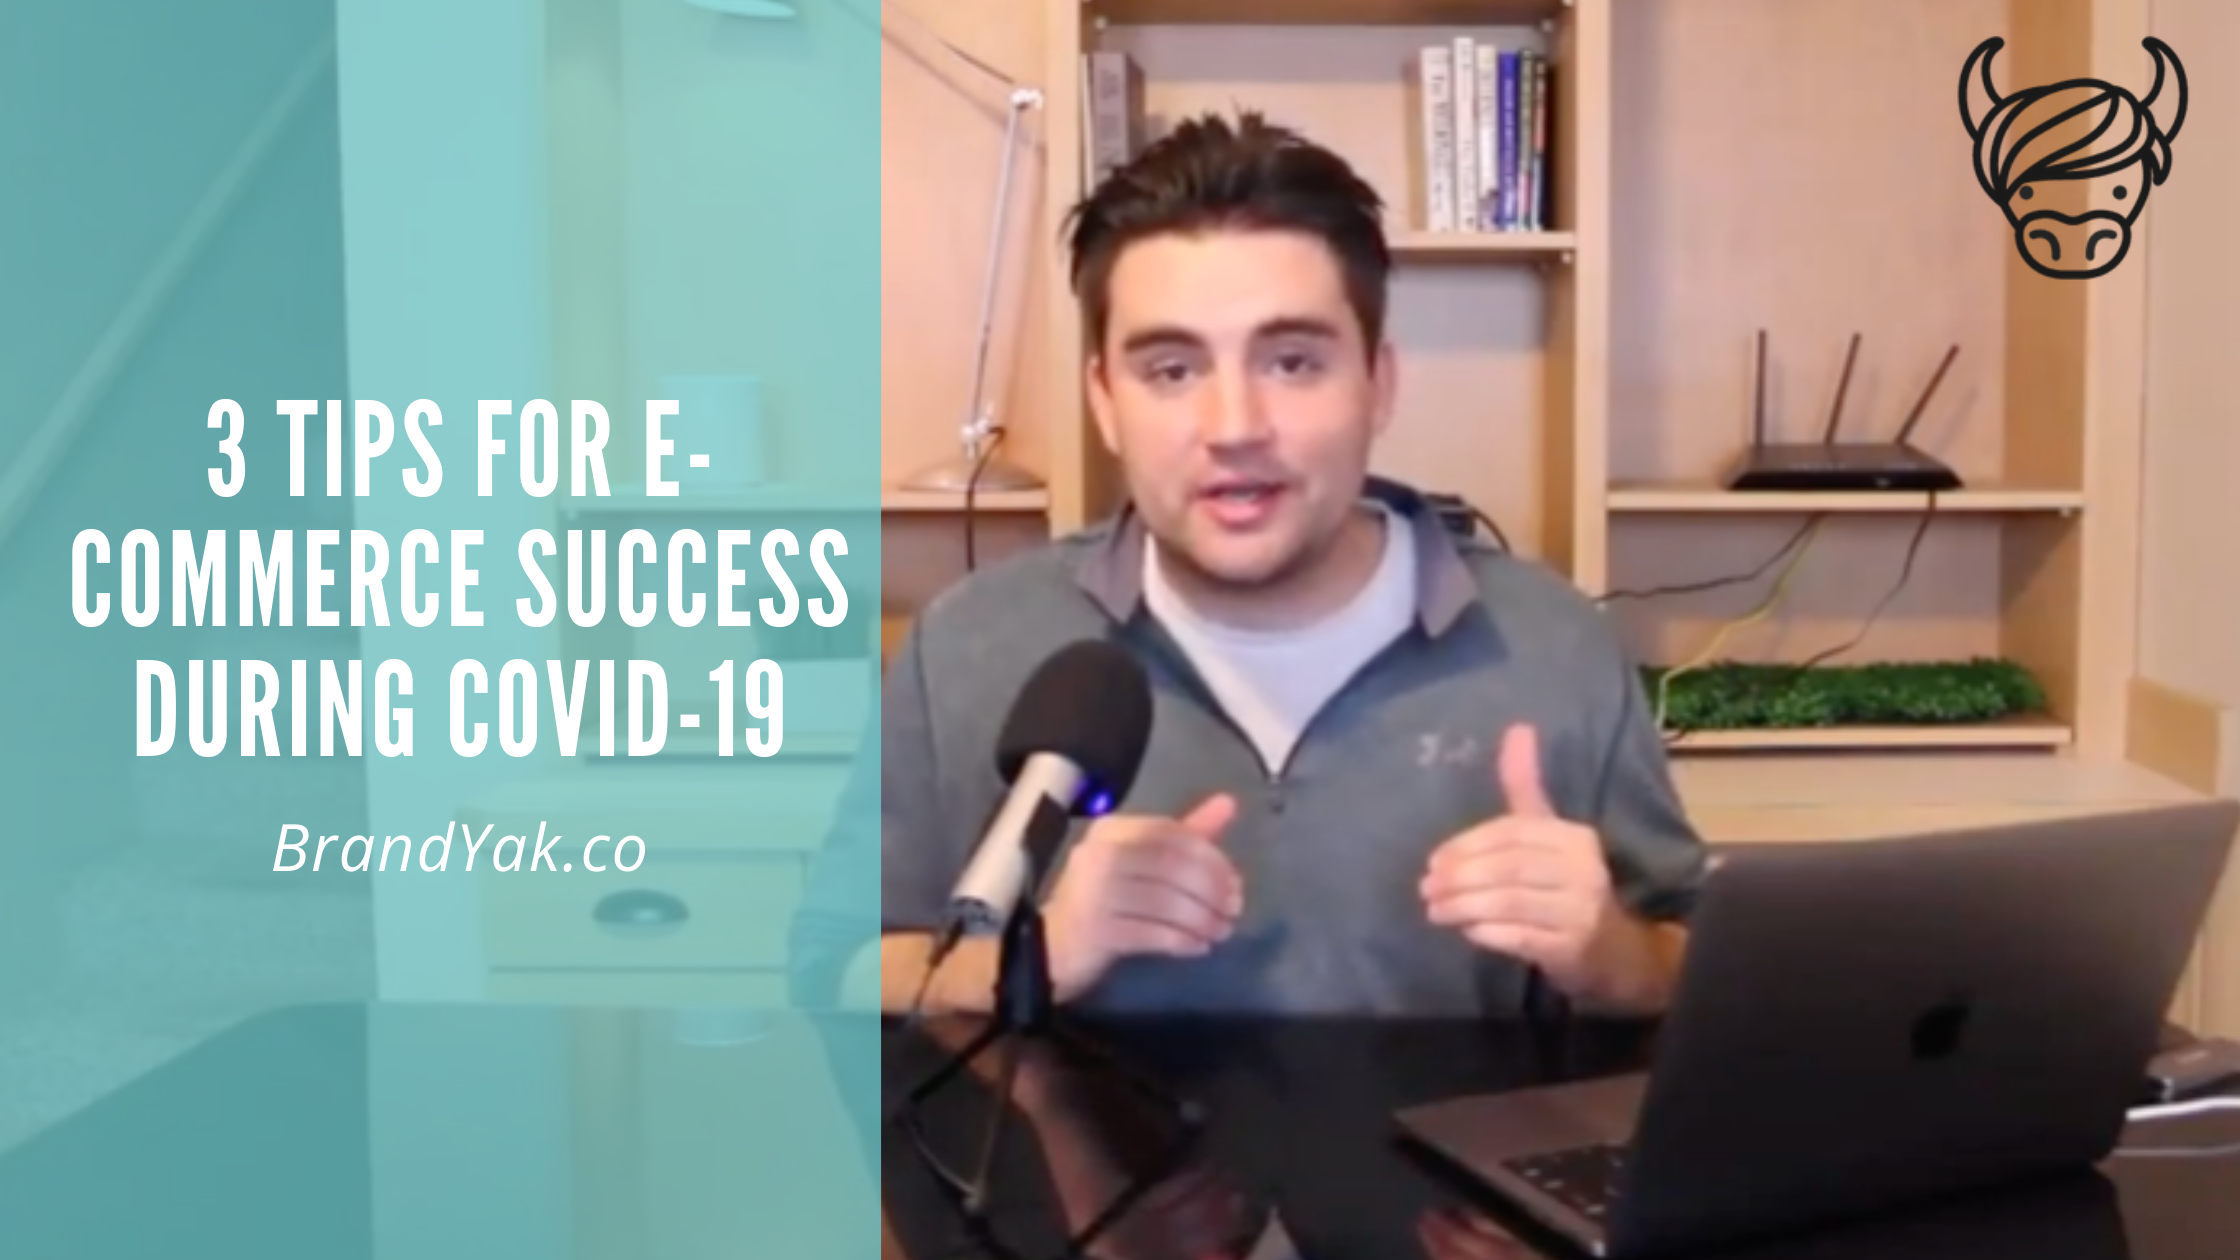 3 Tips for e-commerce success during covid-19